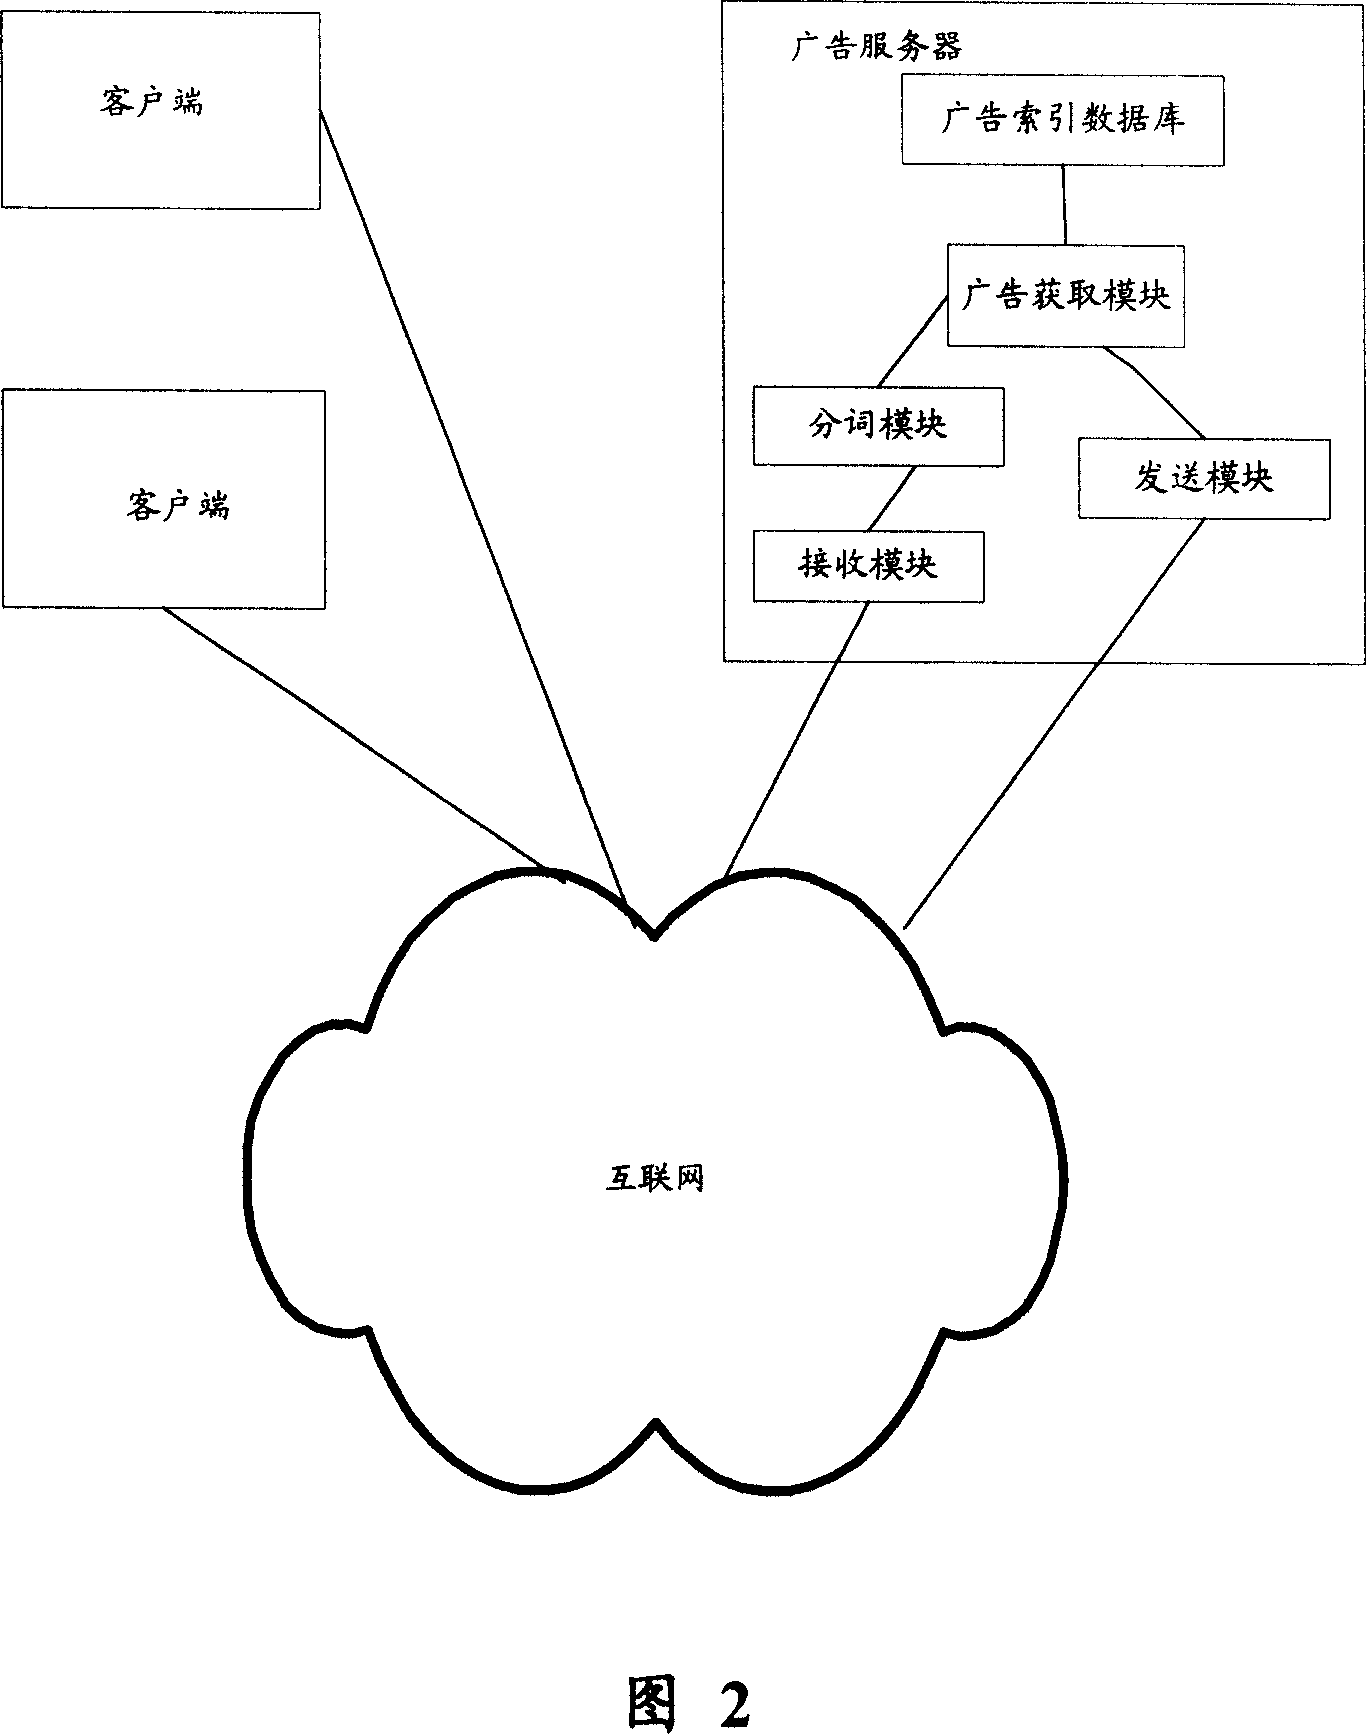 Method and system for issuing advertisement